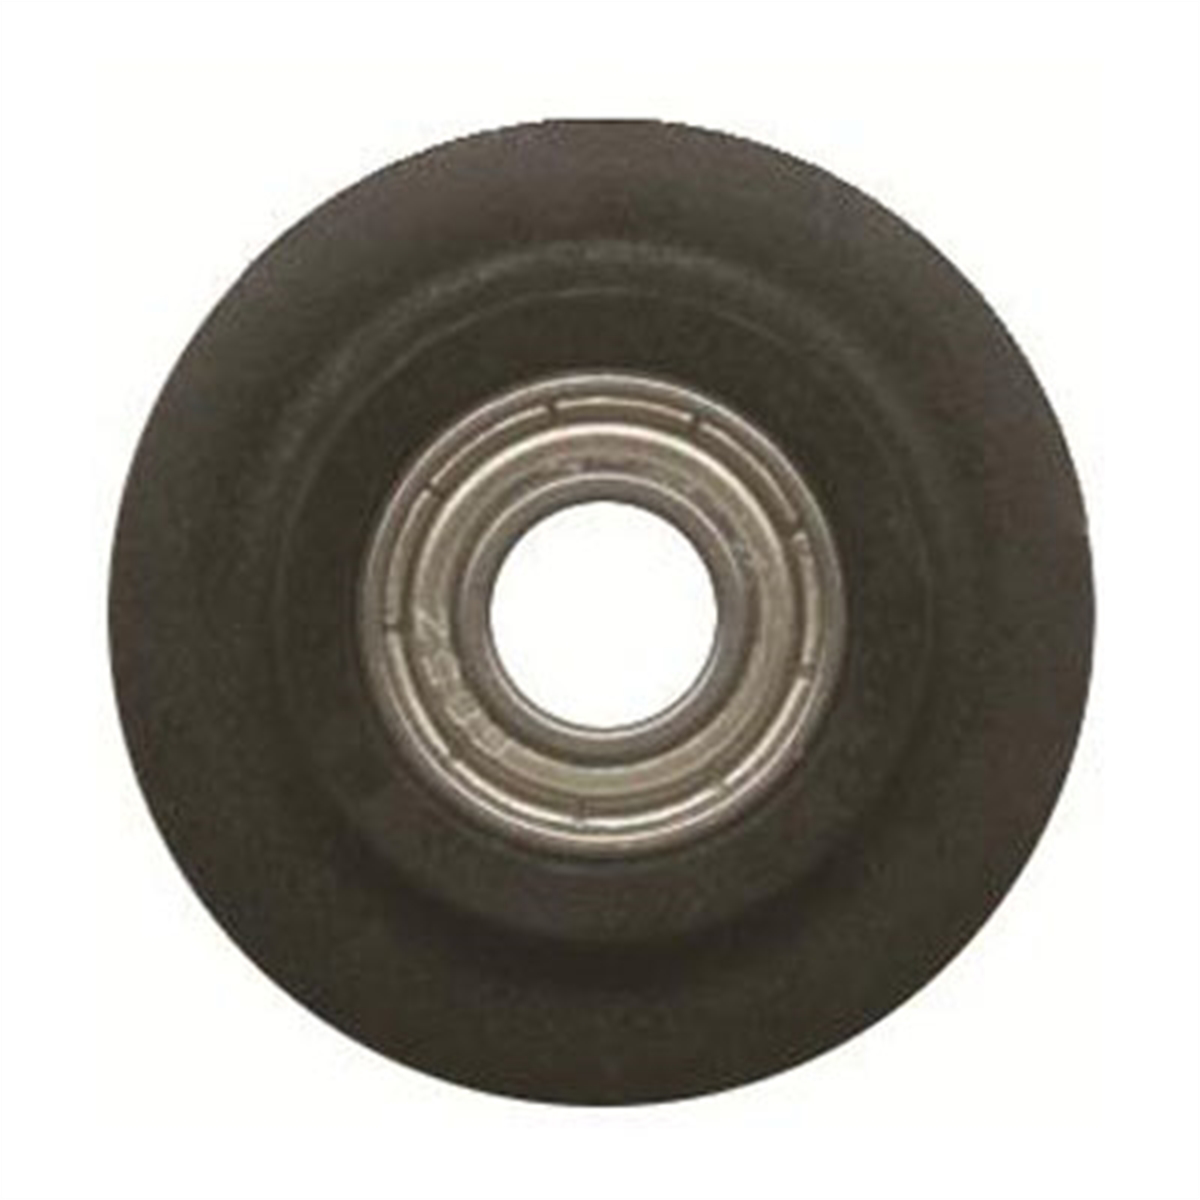 Replacement Cutting Wheel For Tube Cutter